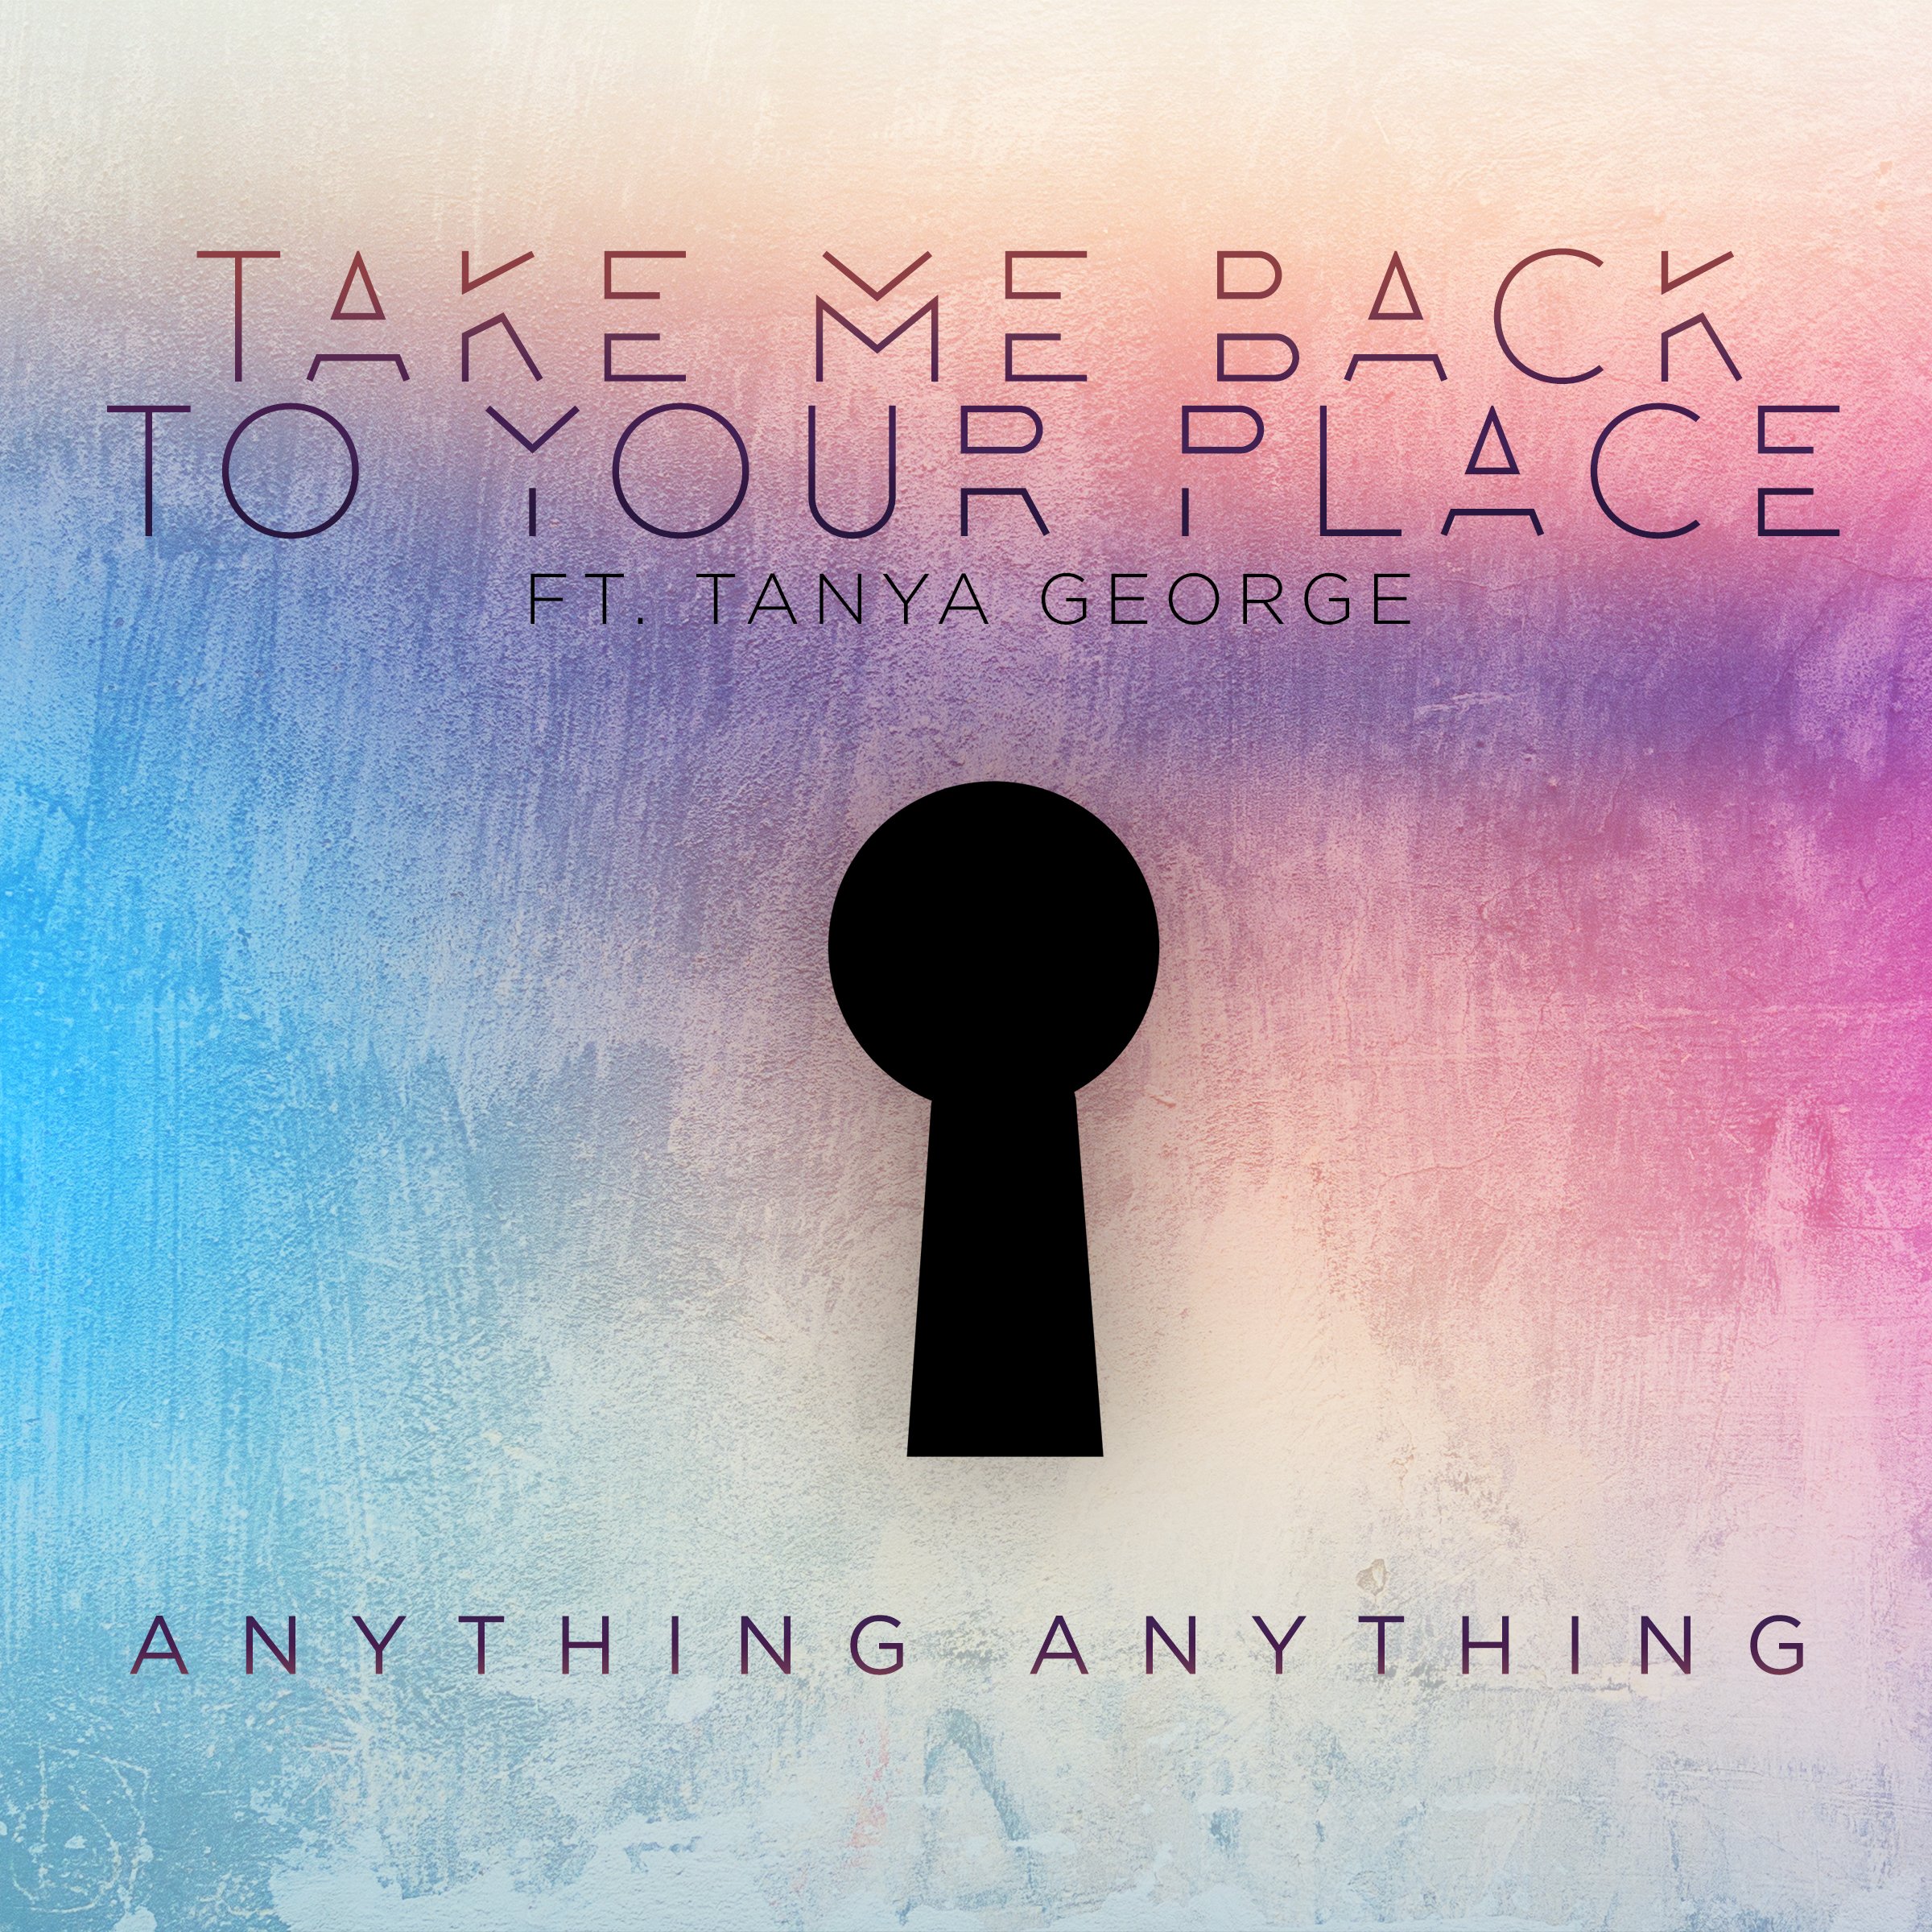 Anything Anything - Take Me Back To Your Place (iTunes artwork).jpg